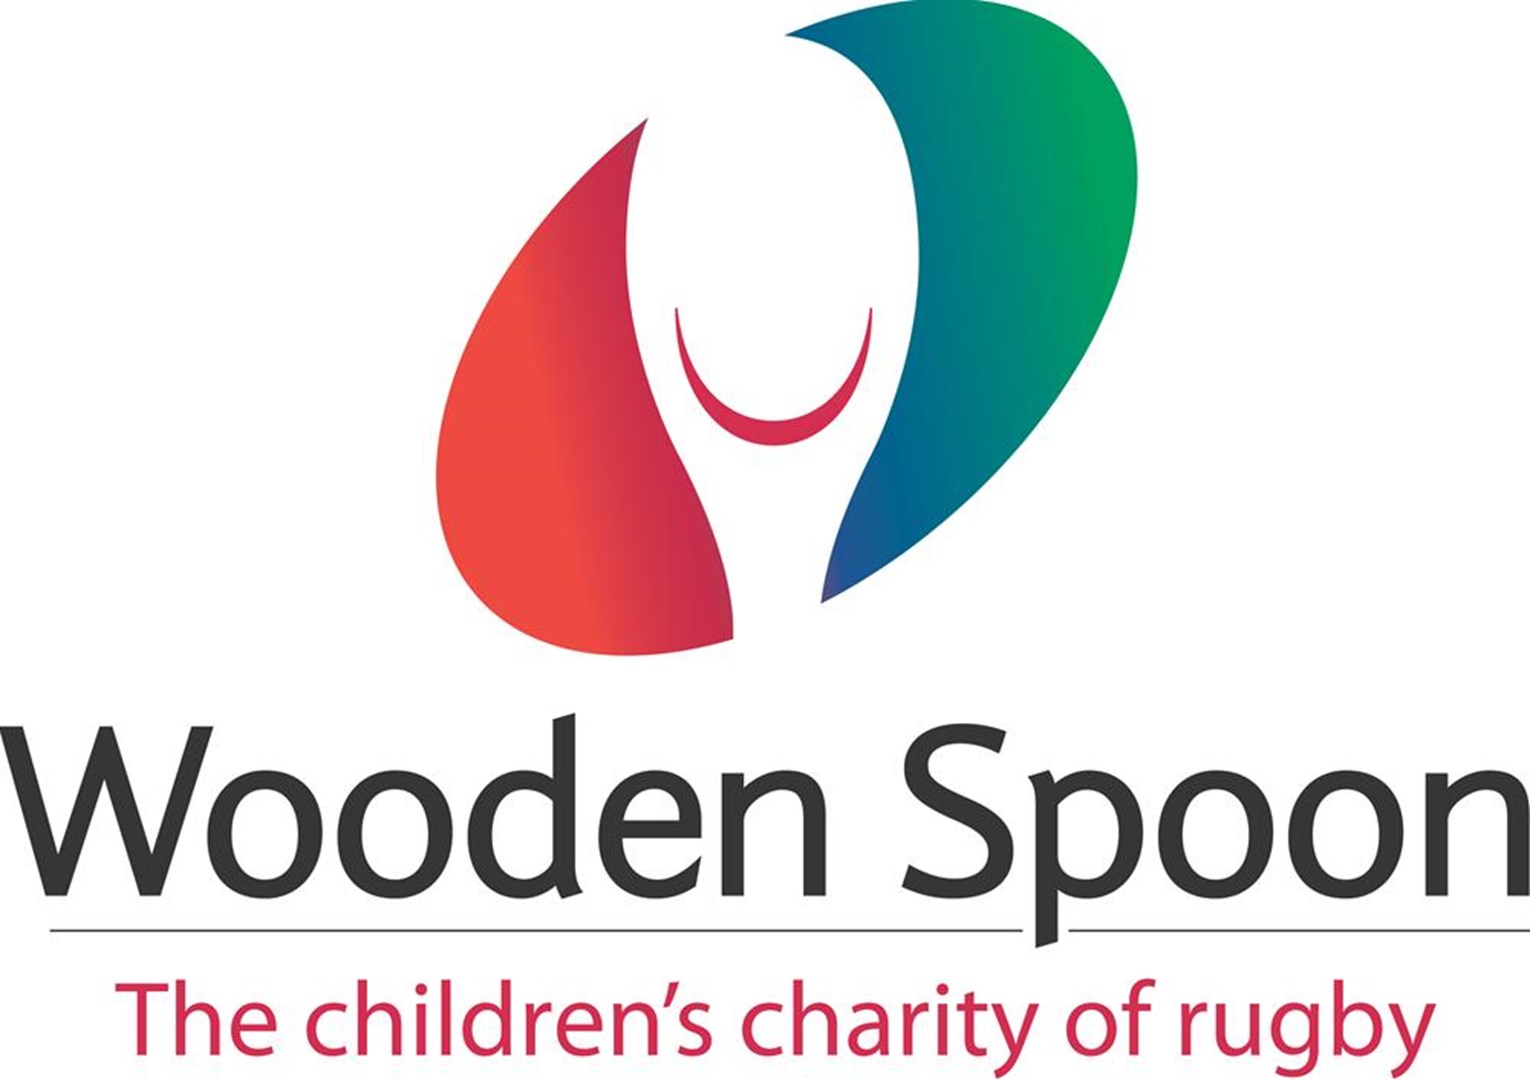 ​£504 raised for Wooden Spoon; The Children's Charity of Rugby - 19th July 2019: